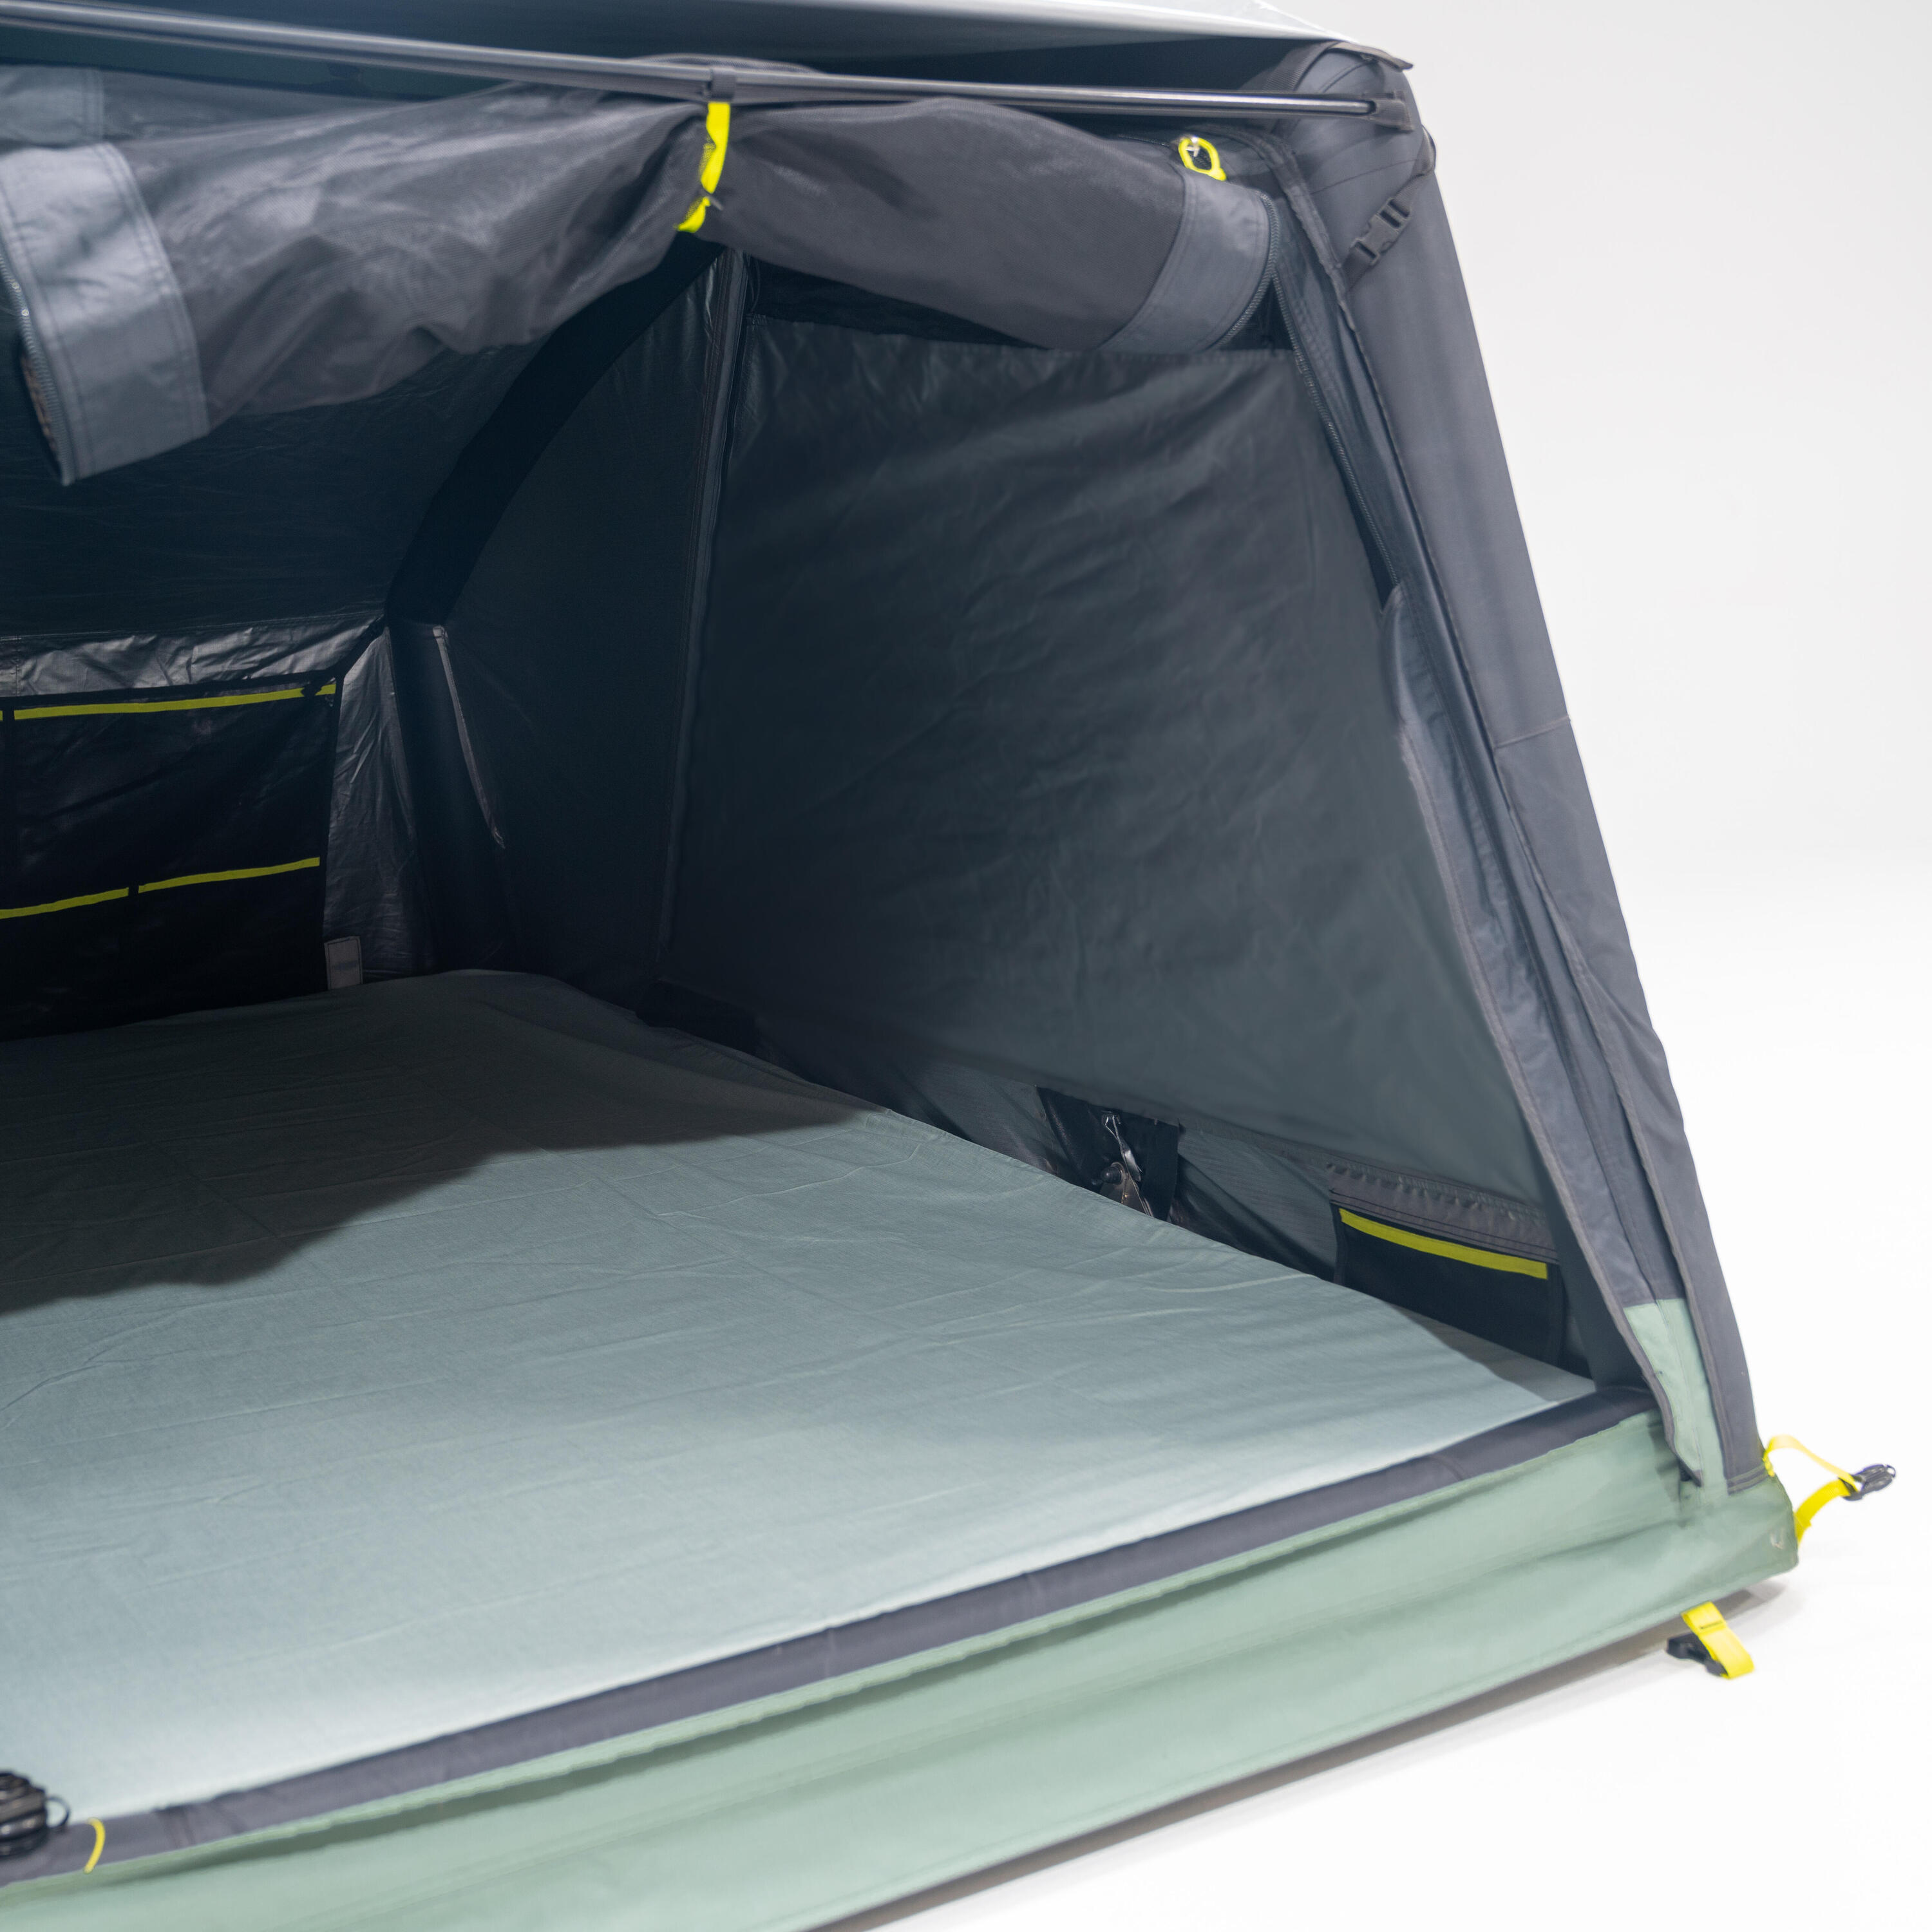 QUECHUA FITTED SHEET FOR ROOF TENT MH900 2P